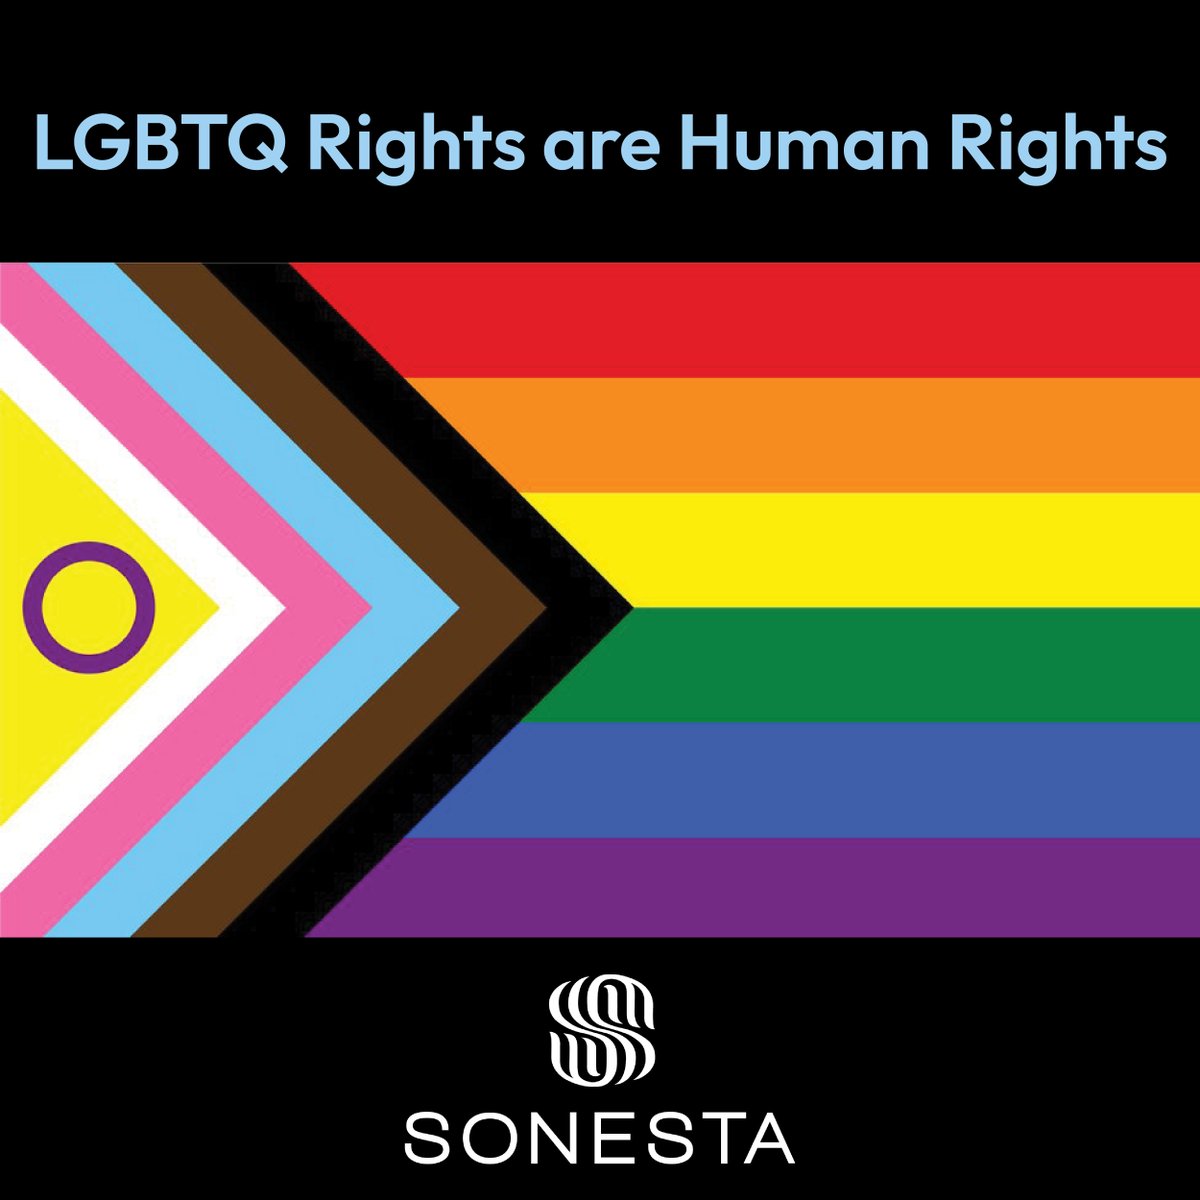 At Sonesta, we're committed to diversity and inclusivity for all! We're halfway through Pride Month, but we celebrate the LGBTQIA+ community 365 days a year. You Are Safe With Us! #SonestaWhitePlains #SonestaHotel #Pride #PrideMonth #LGBTQAllies #LGBTQRightsAreHumanRights